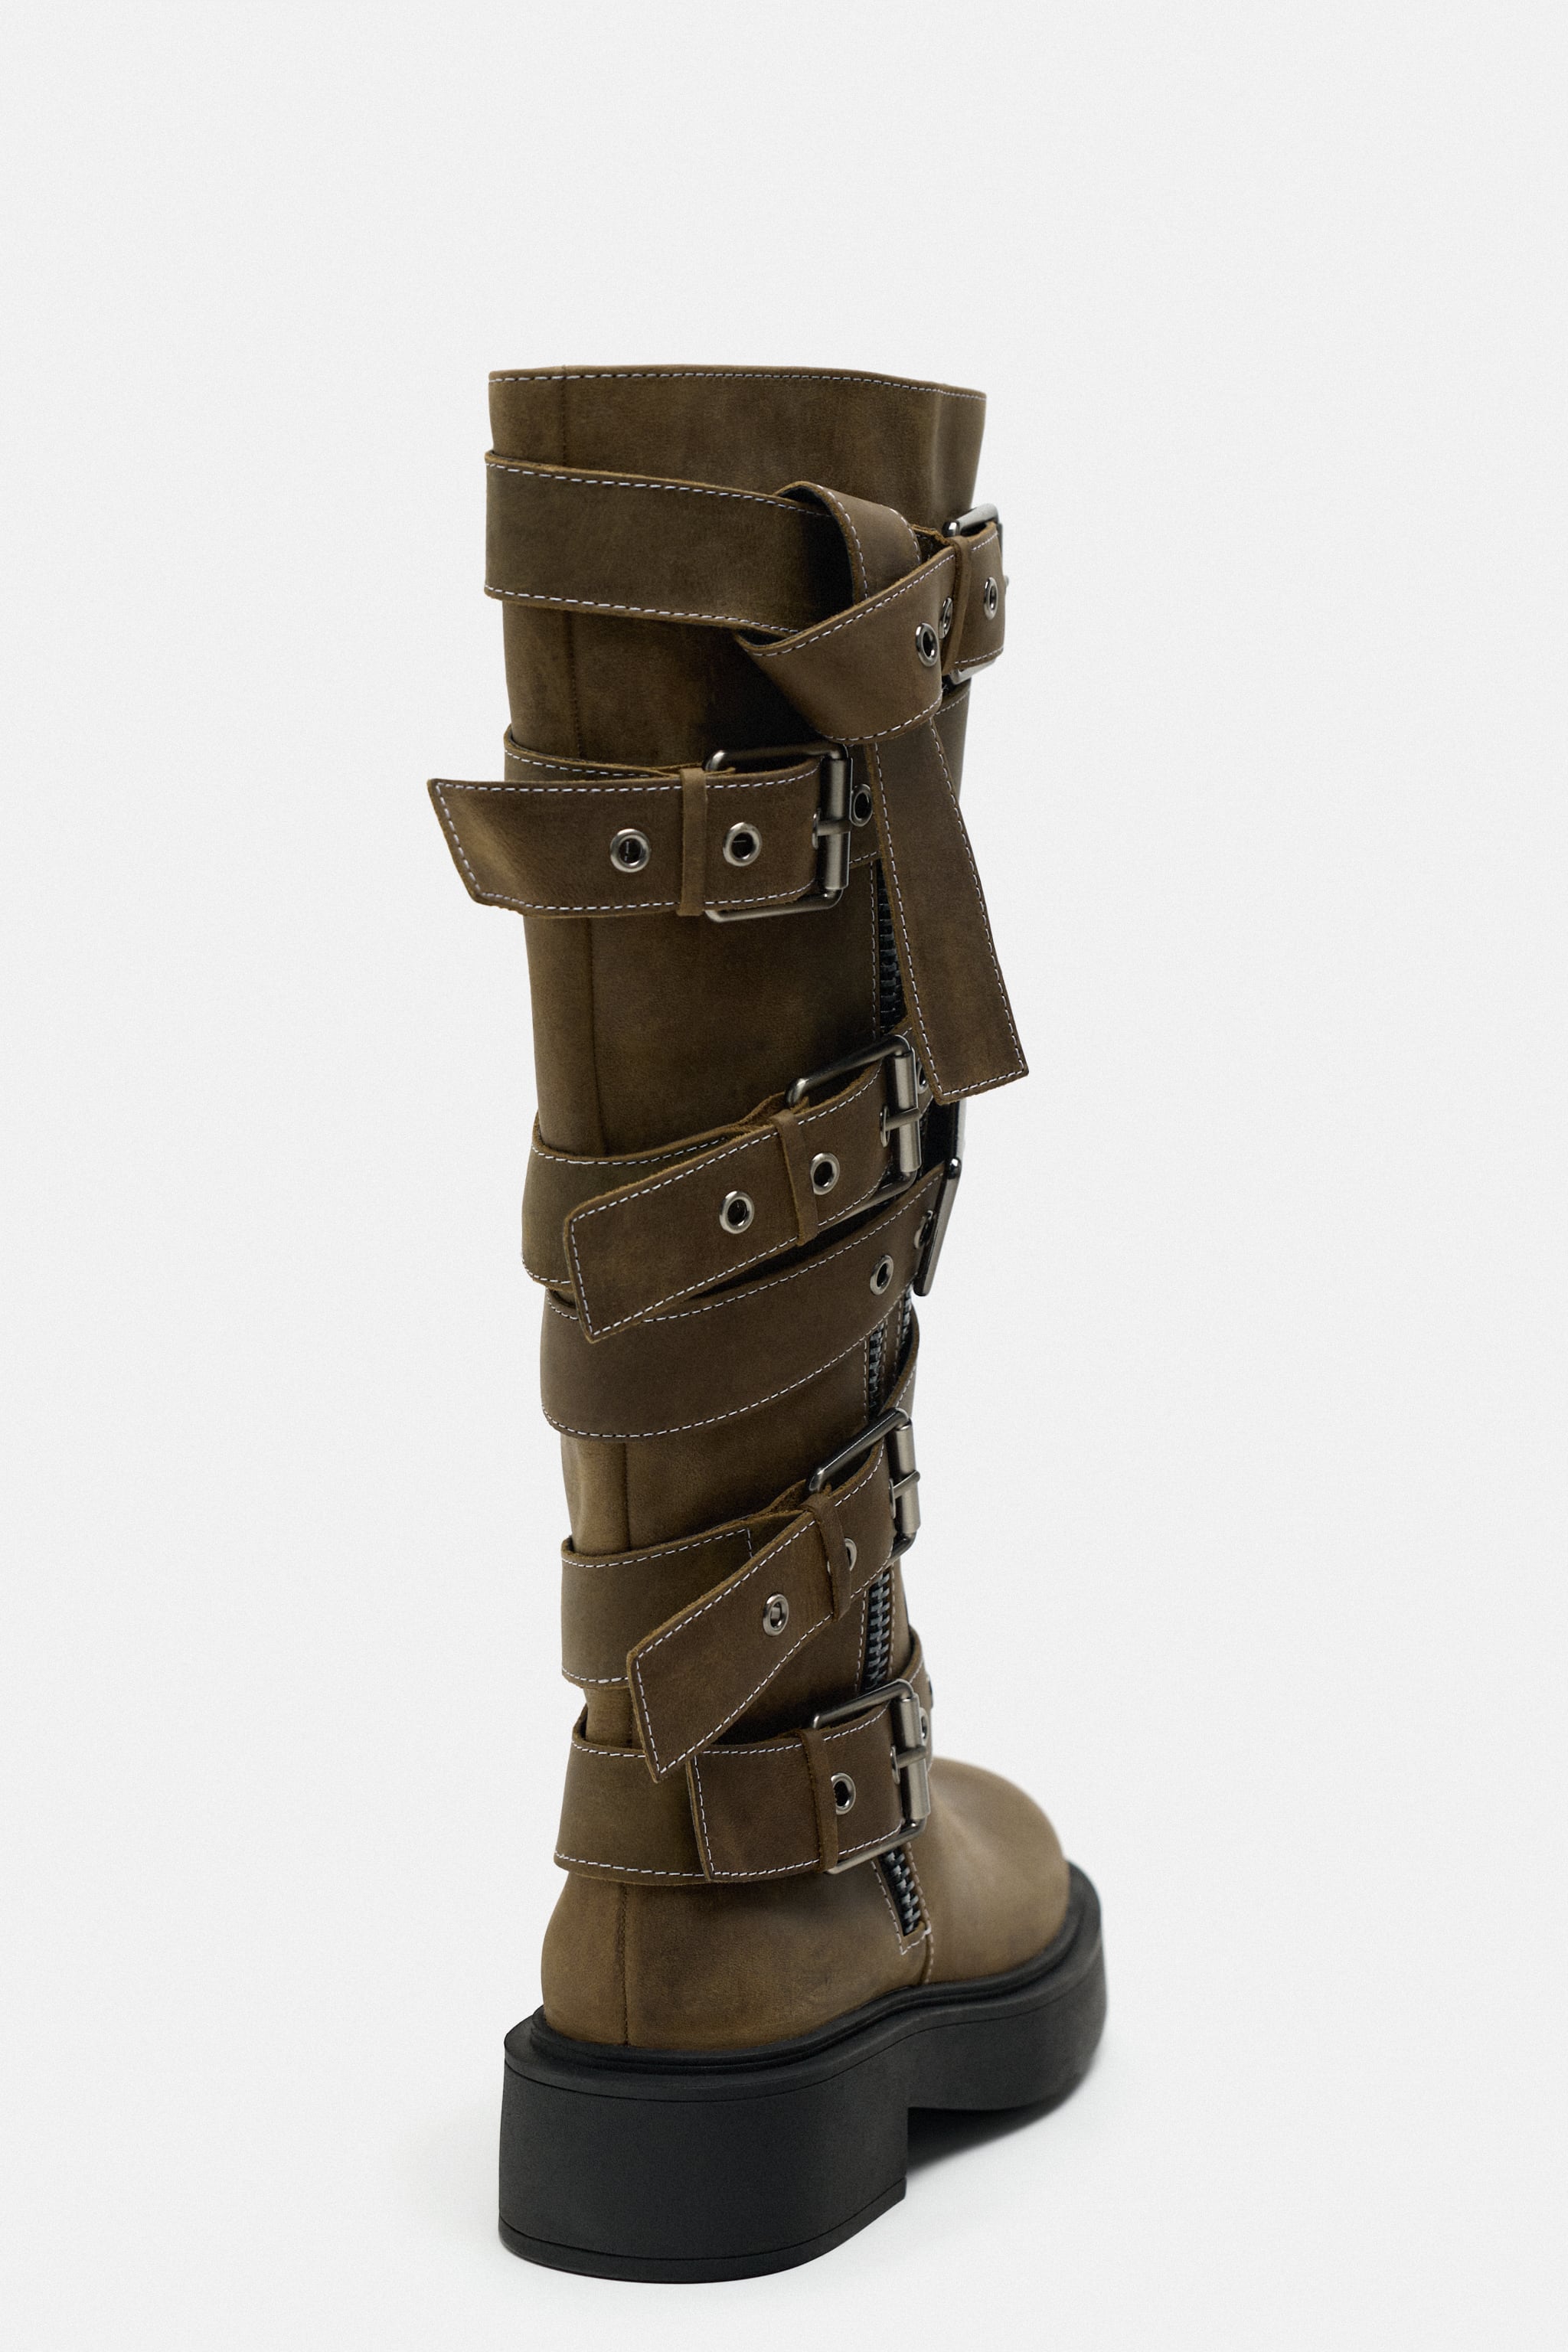 BUCKLED LEATHER KNEE HIGH BOOTS